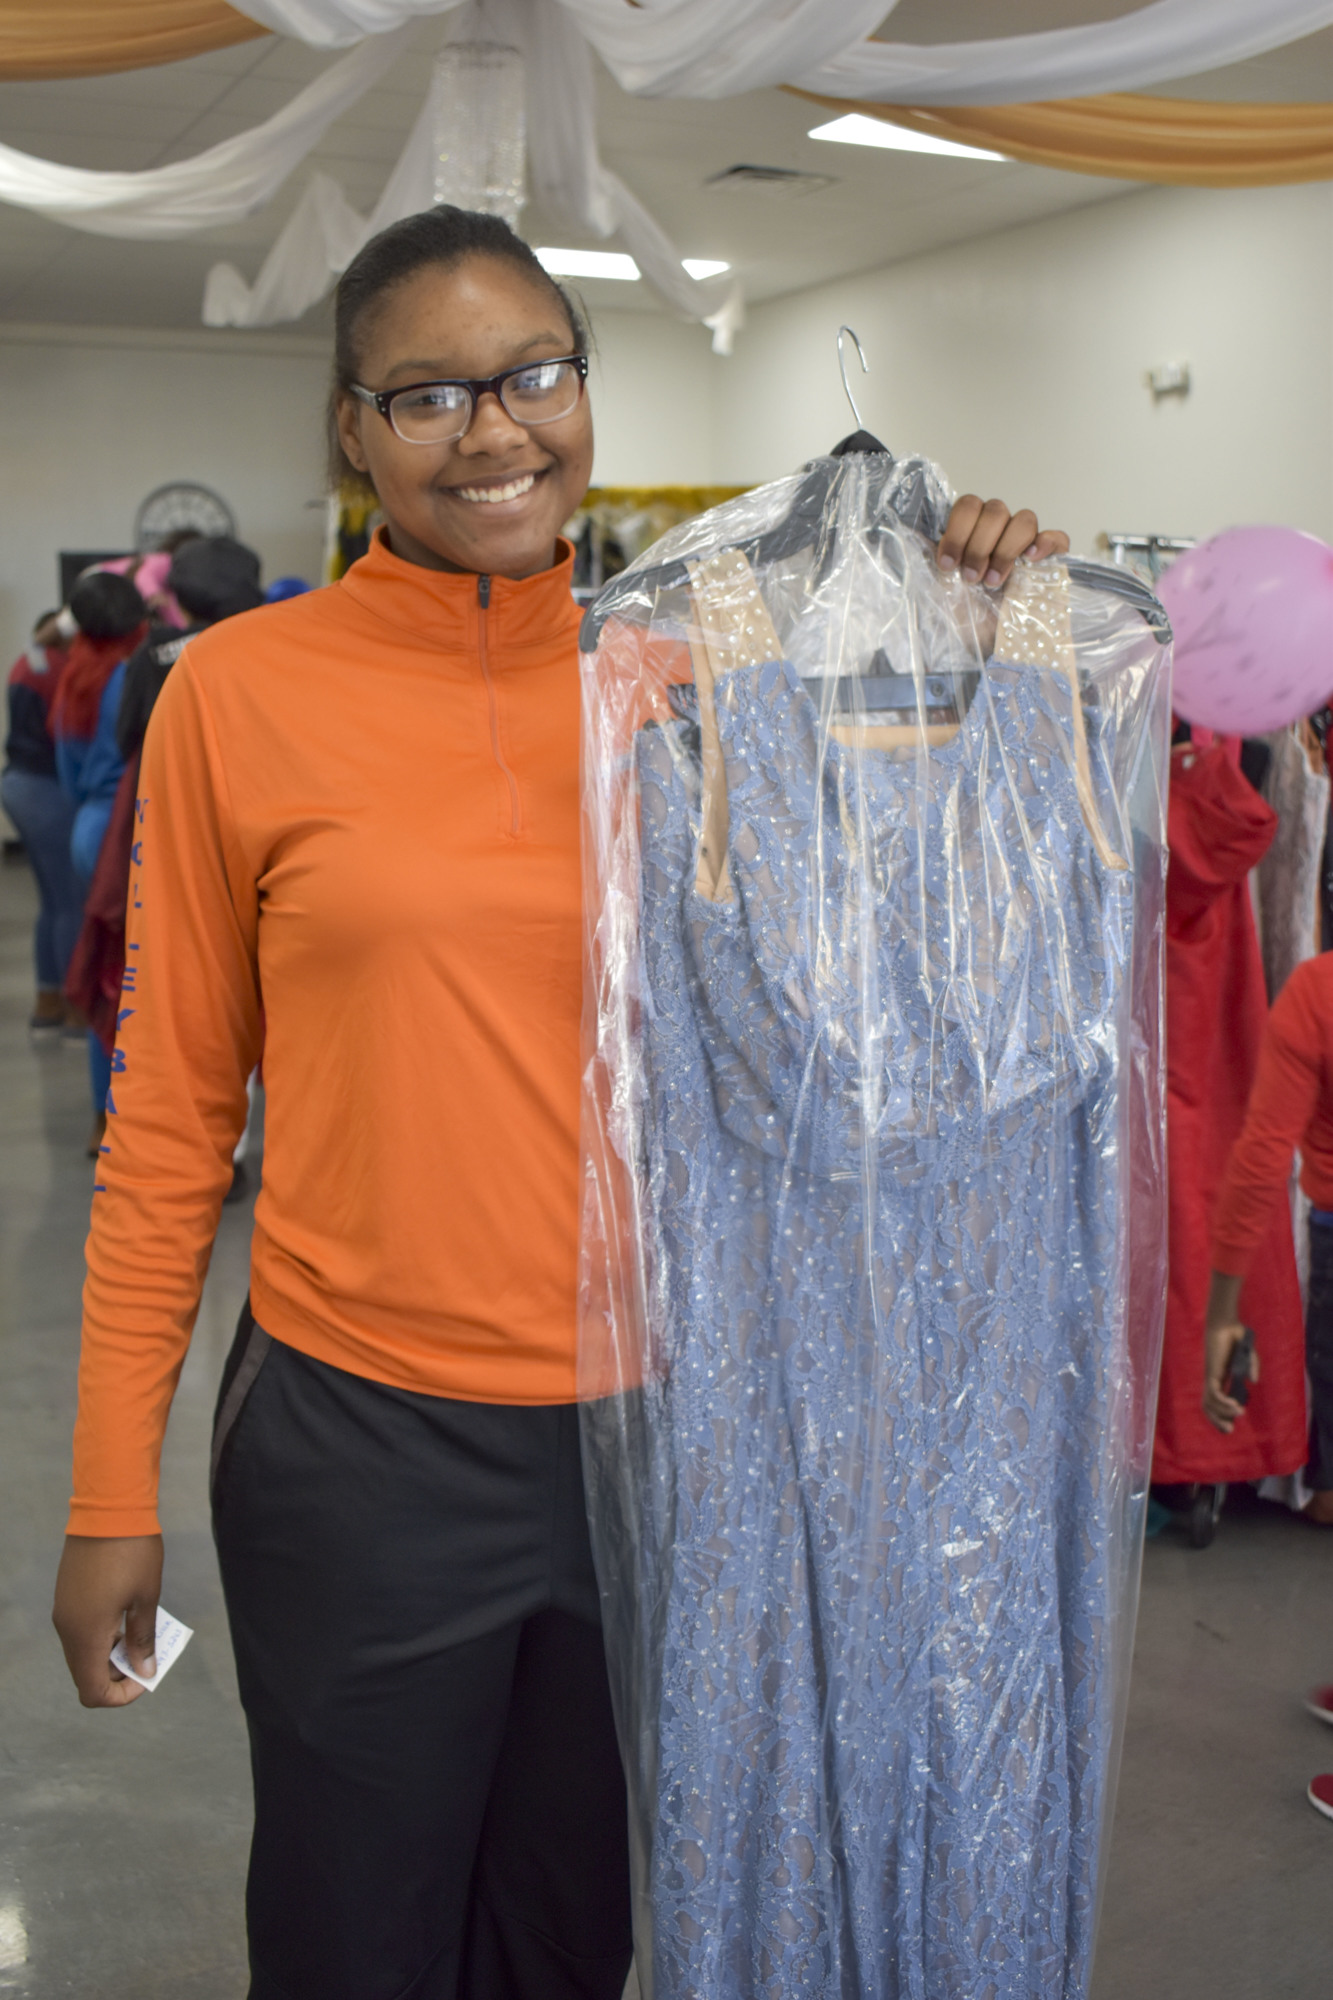 Makayhla Lowe, 16, picked out a dress for the Southeast High School military ball.